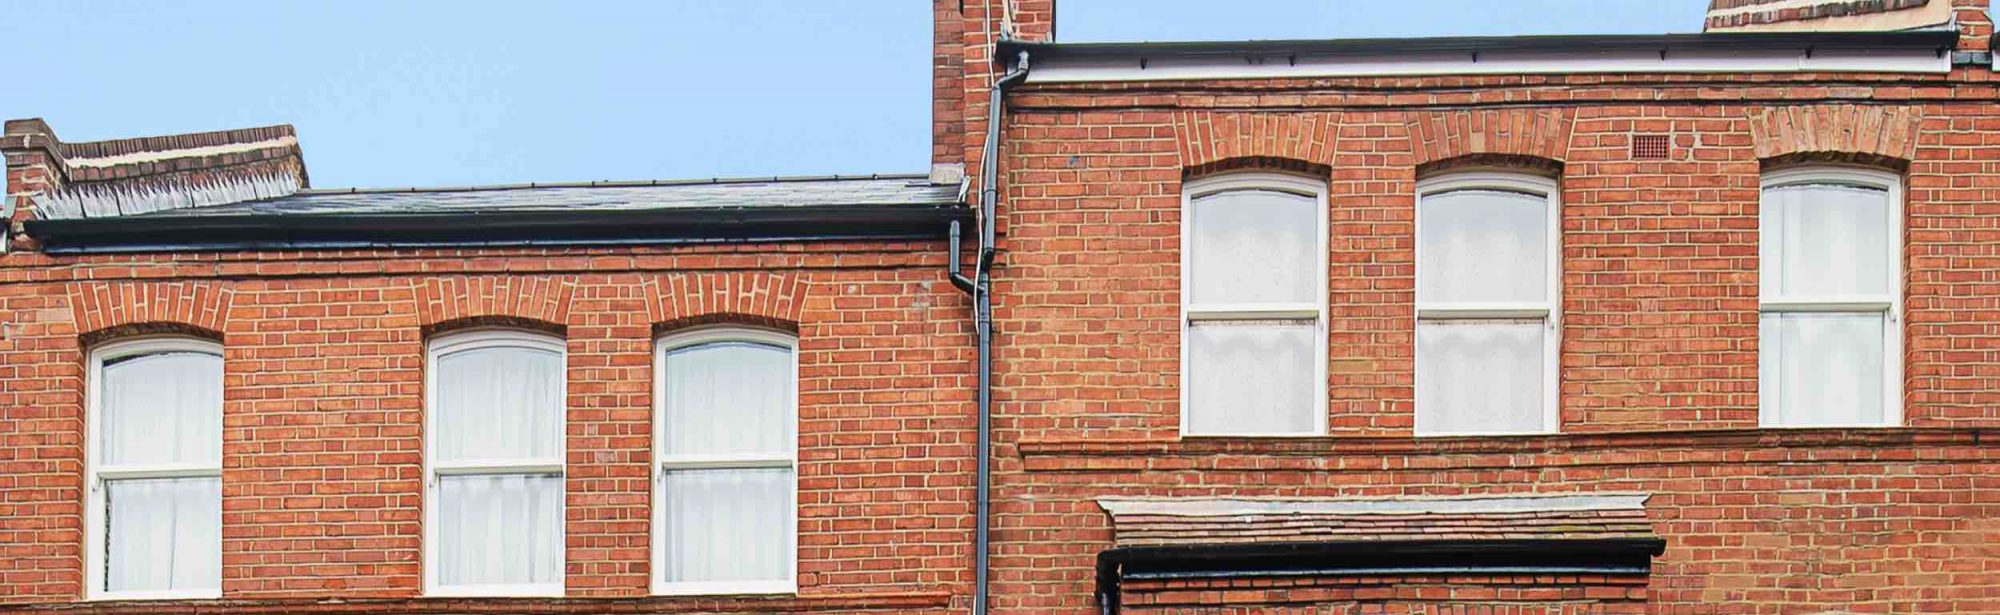 Will sash windows suit any home?